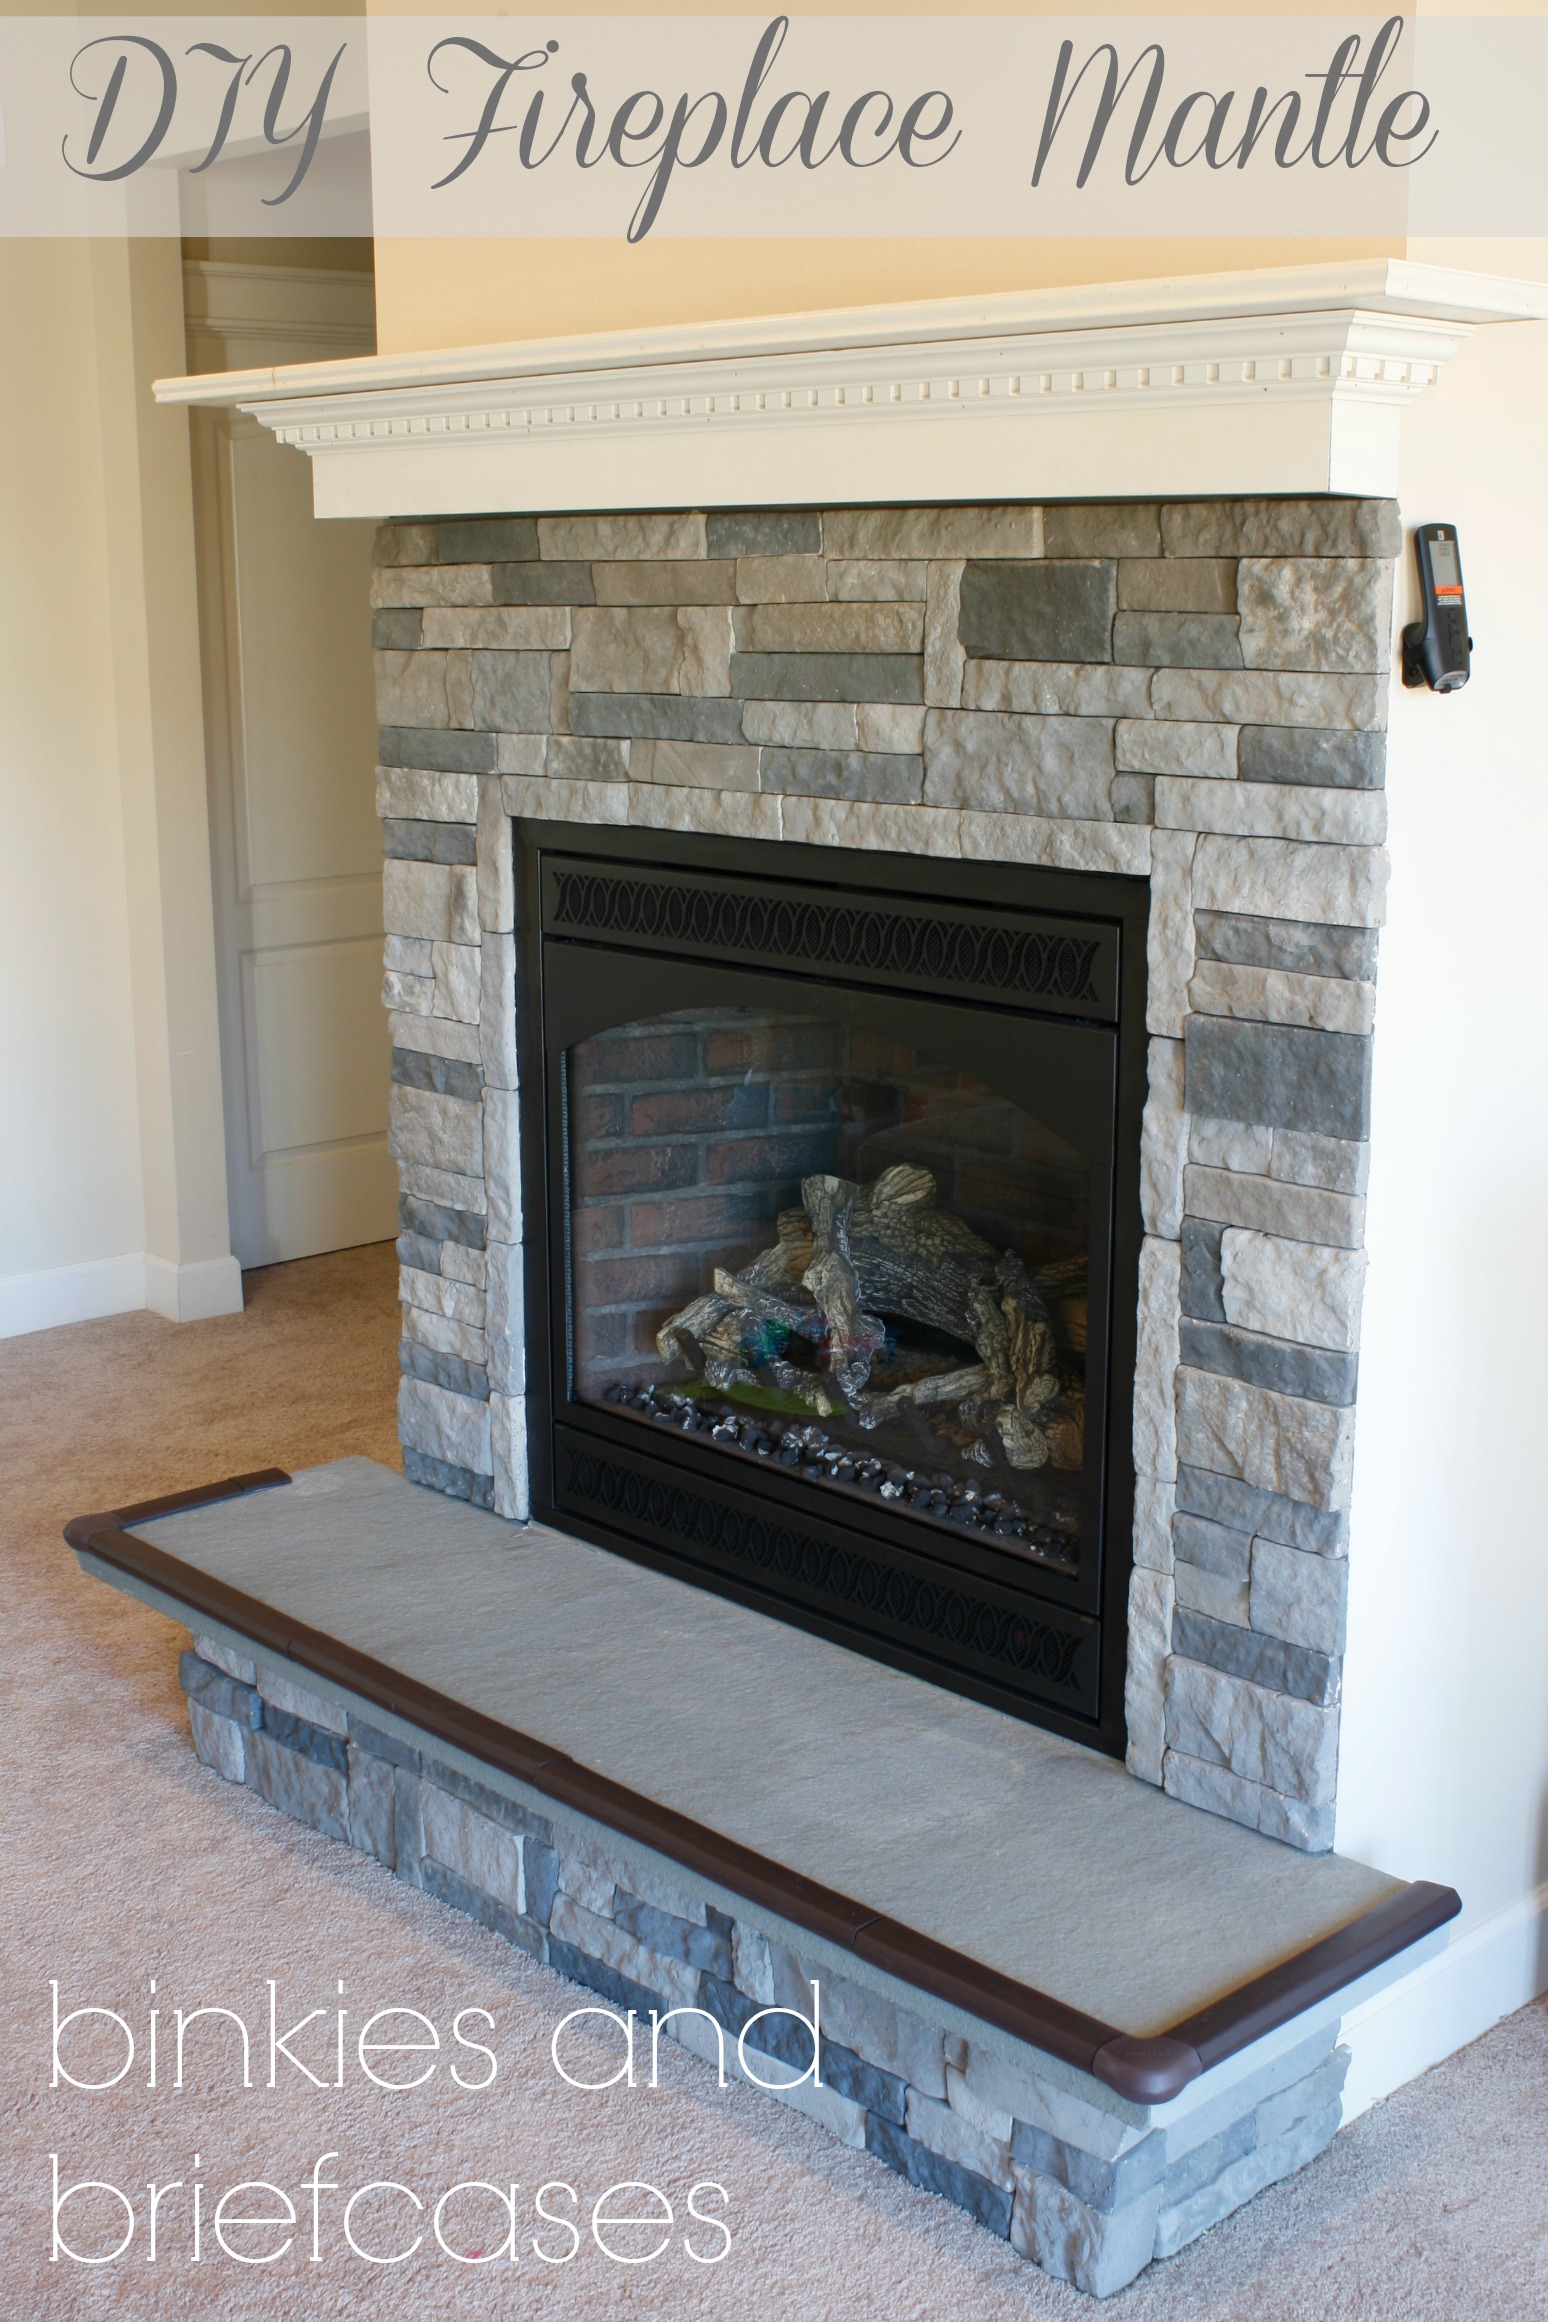 Build your own fire place mantle with 5 boards